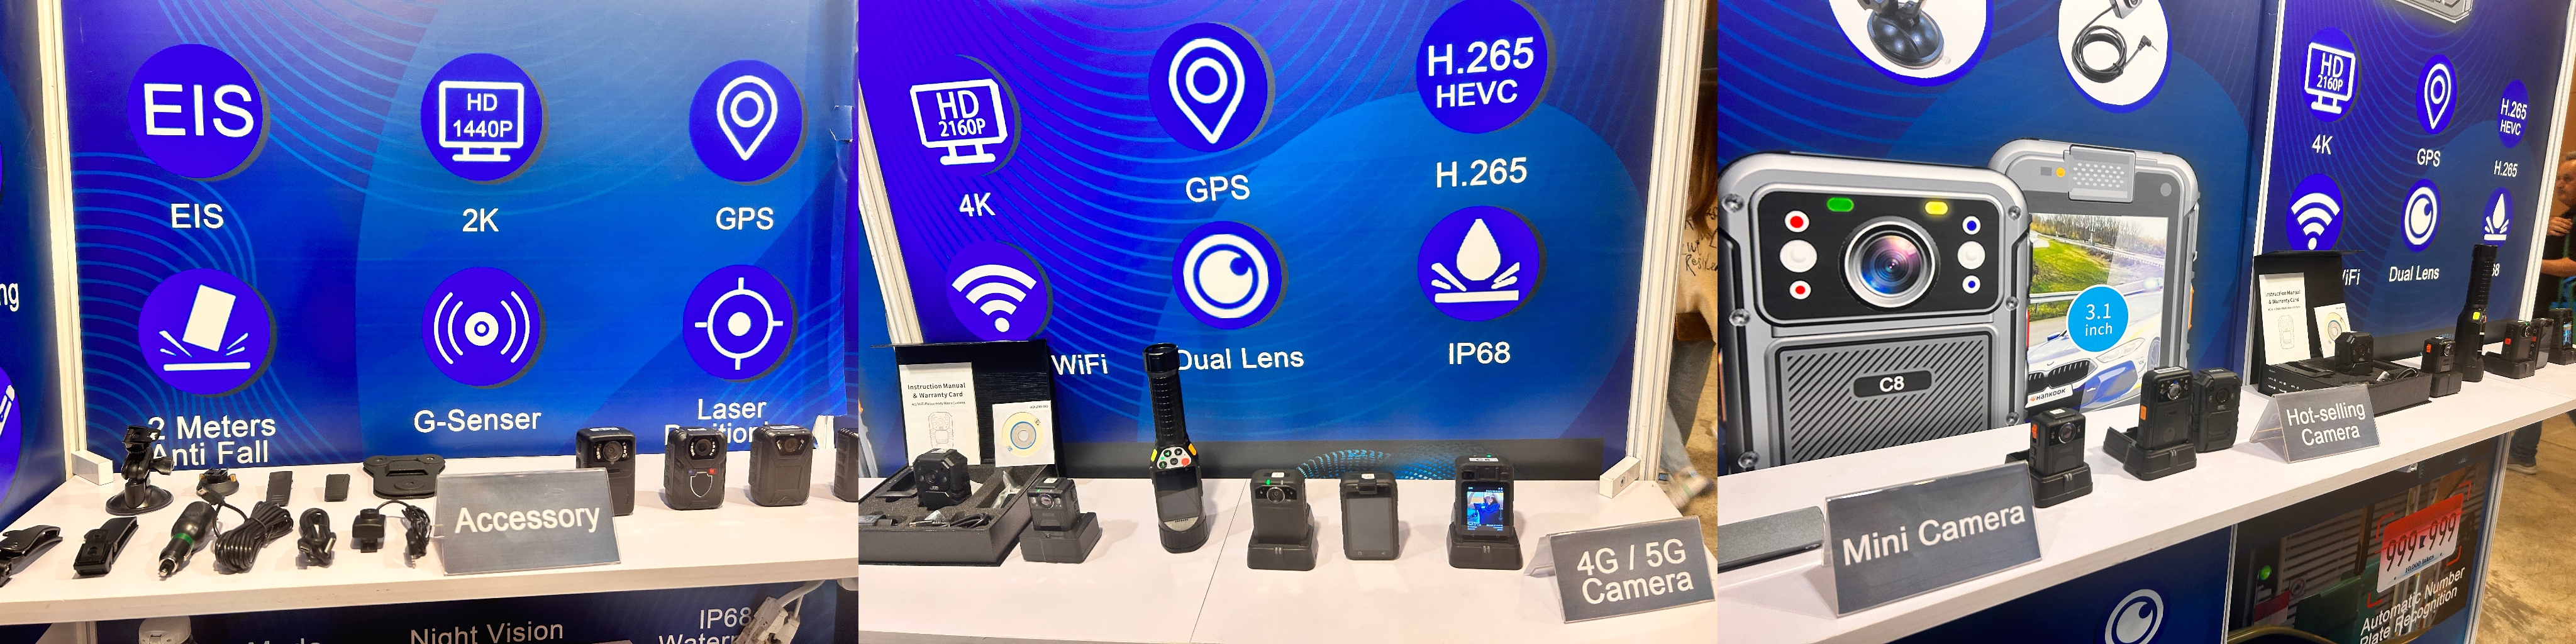 CammPro Released New Products at the 2024 Hong Kong Spring Electronics Fair